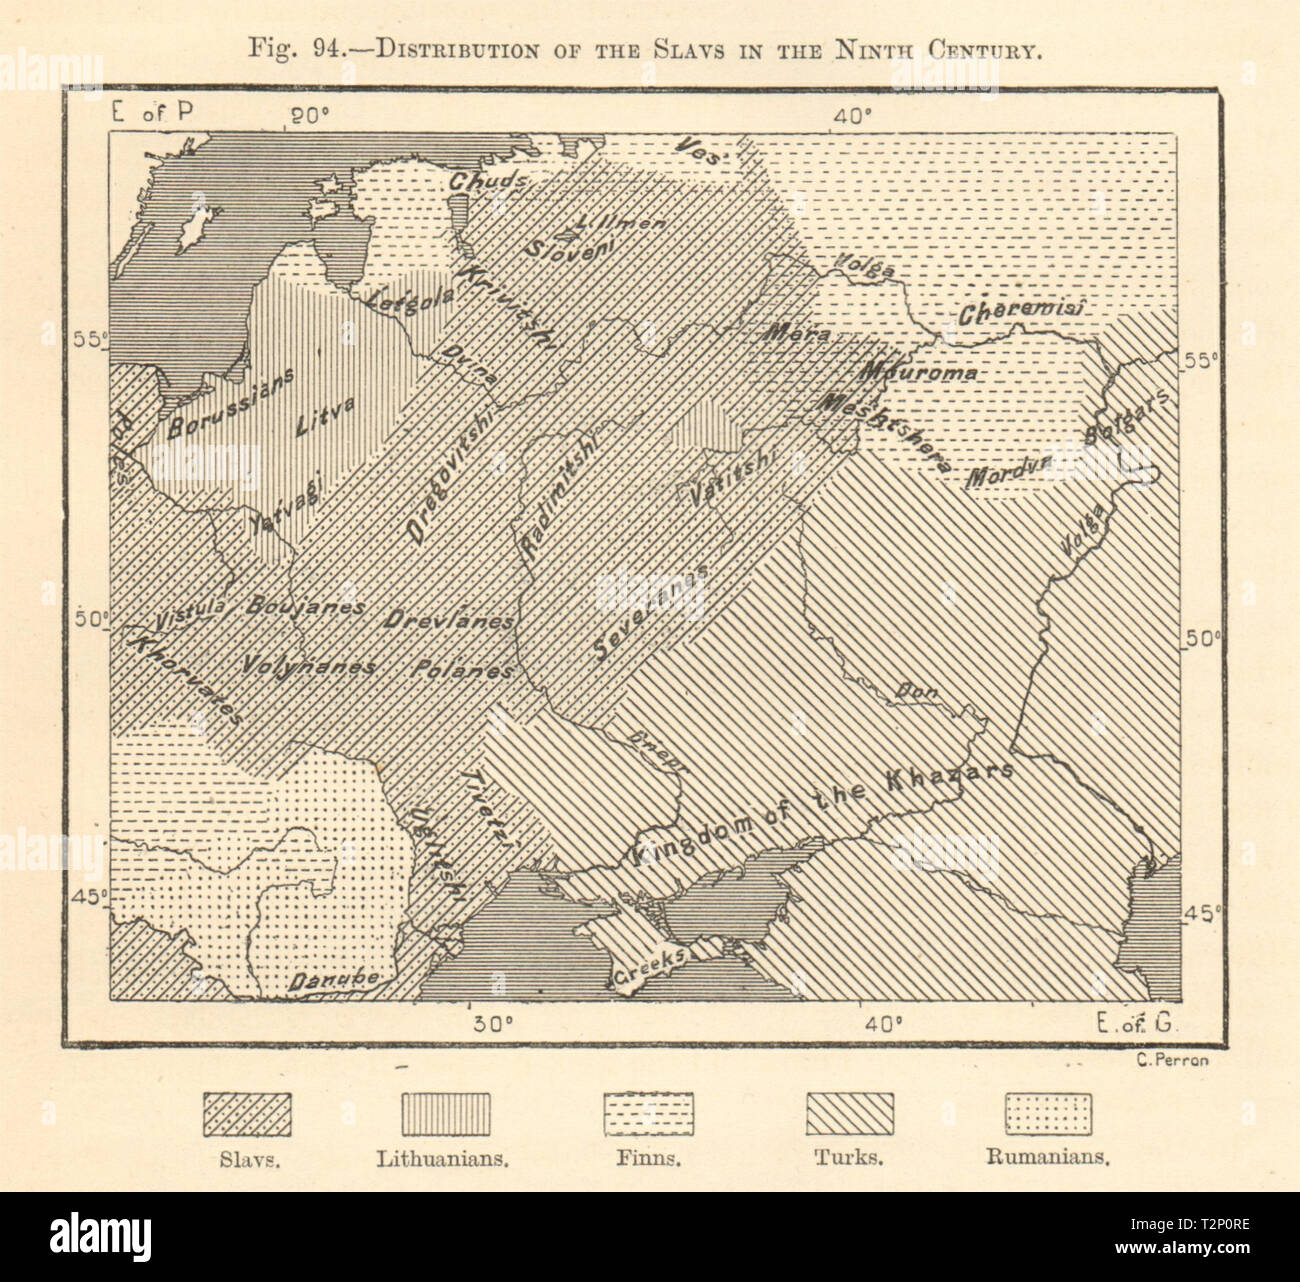 Distribution of the Slavs in the Ninth Century. Eastern Europe. Sketch map 1885 Stock Photo